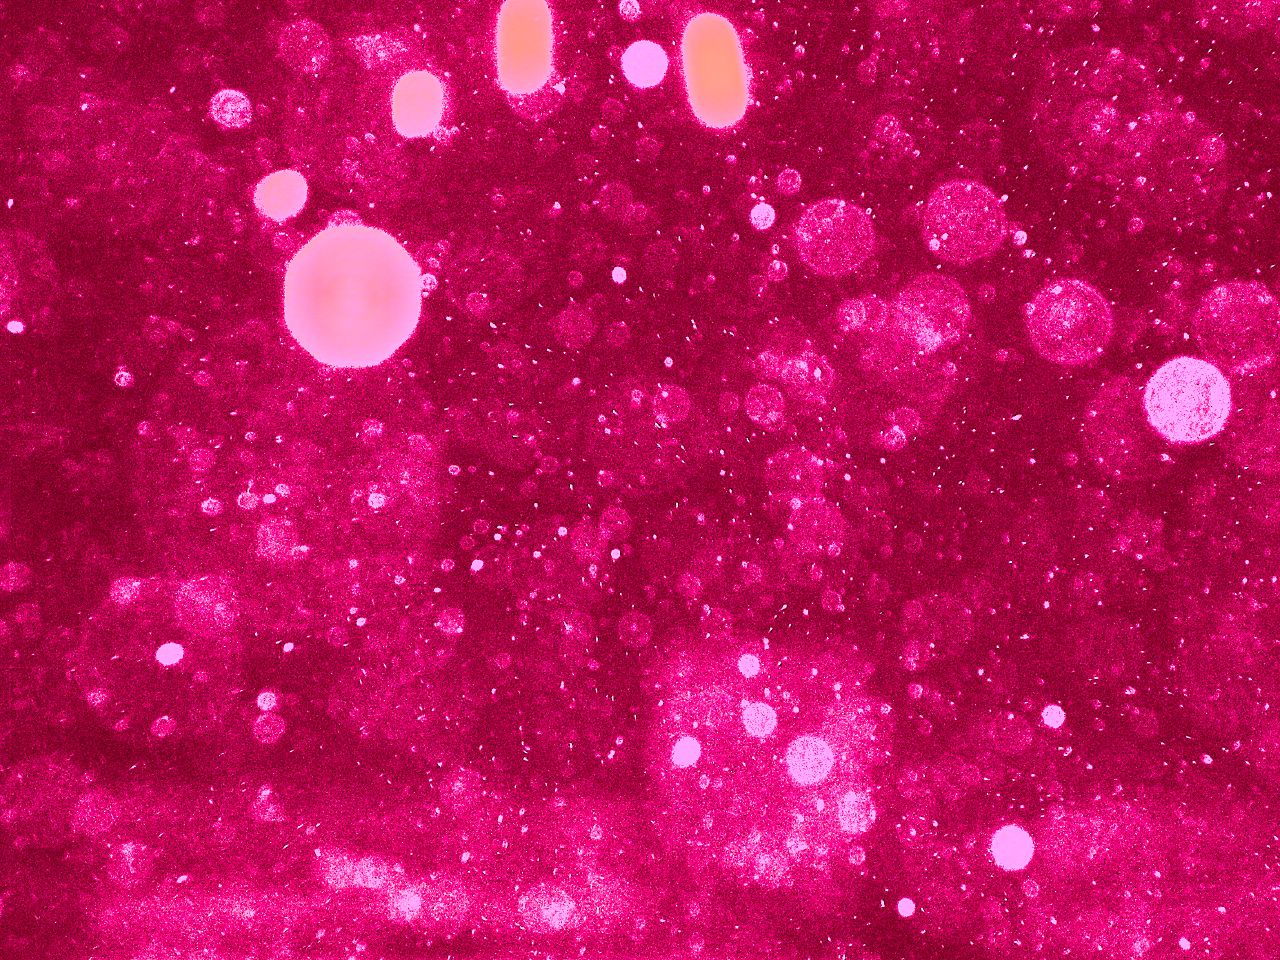 Awsome Backgrounds Wallpapers Pink Sparkly Backgrounds